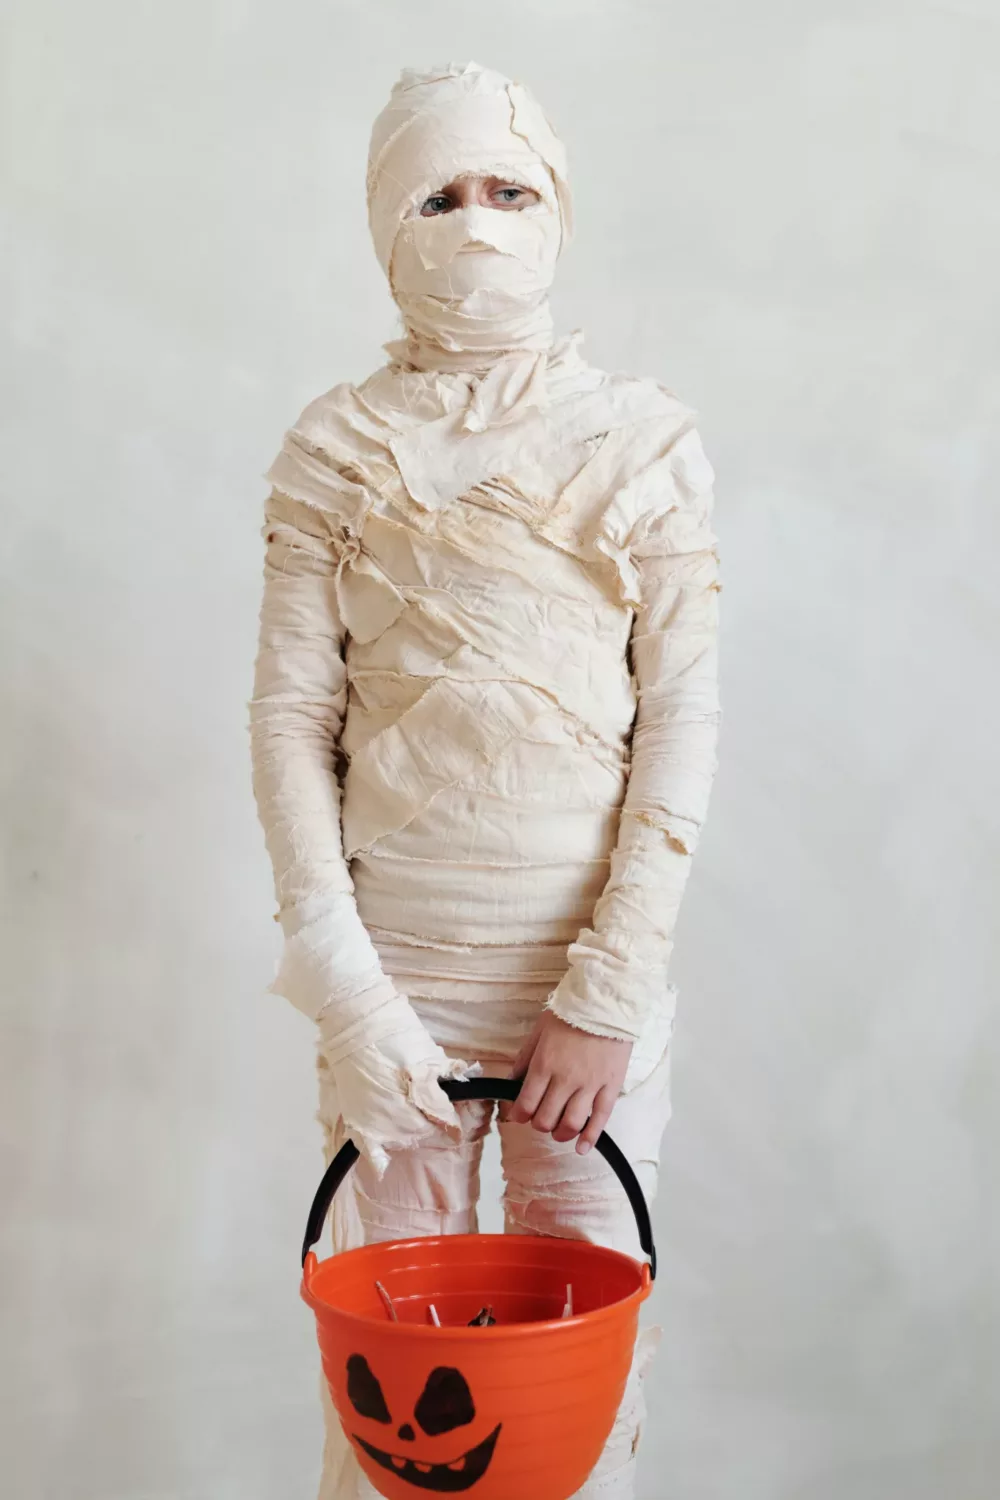 person dressed as a mummy holding a trick or treat pail